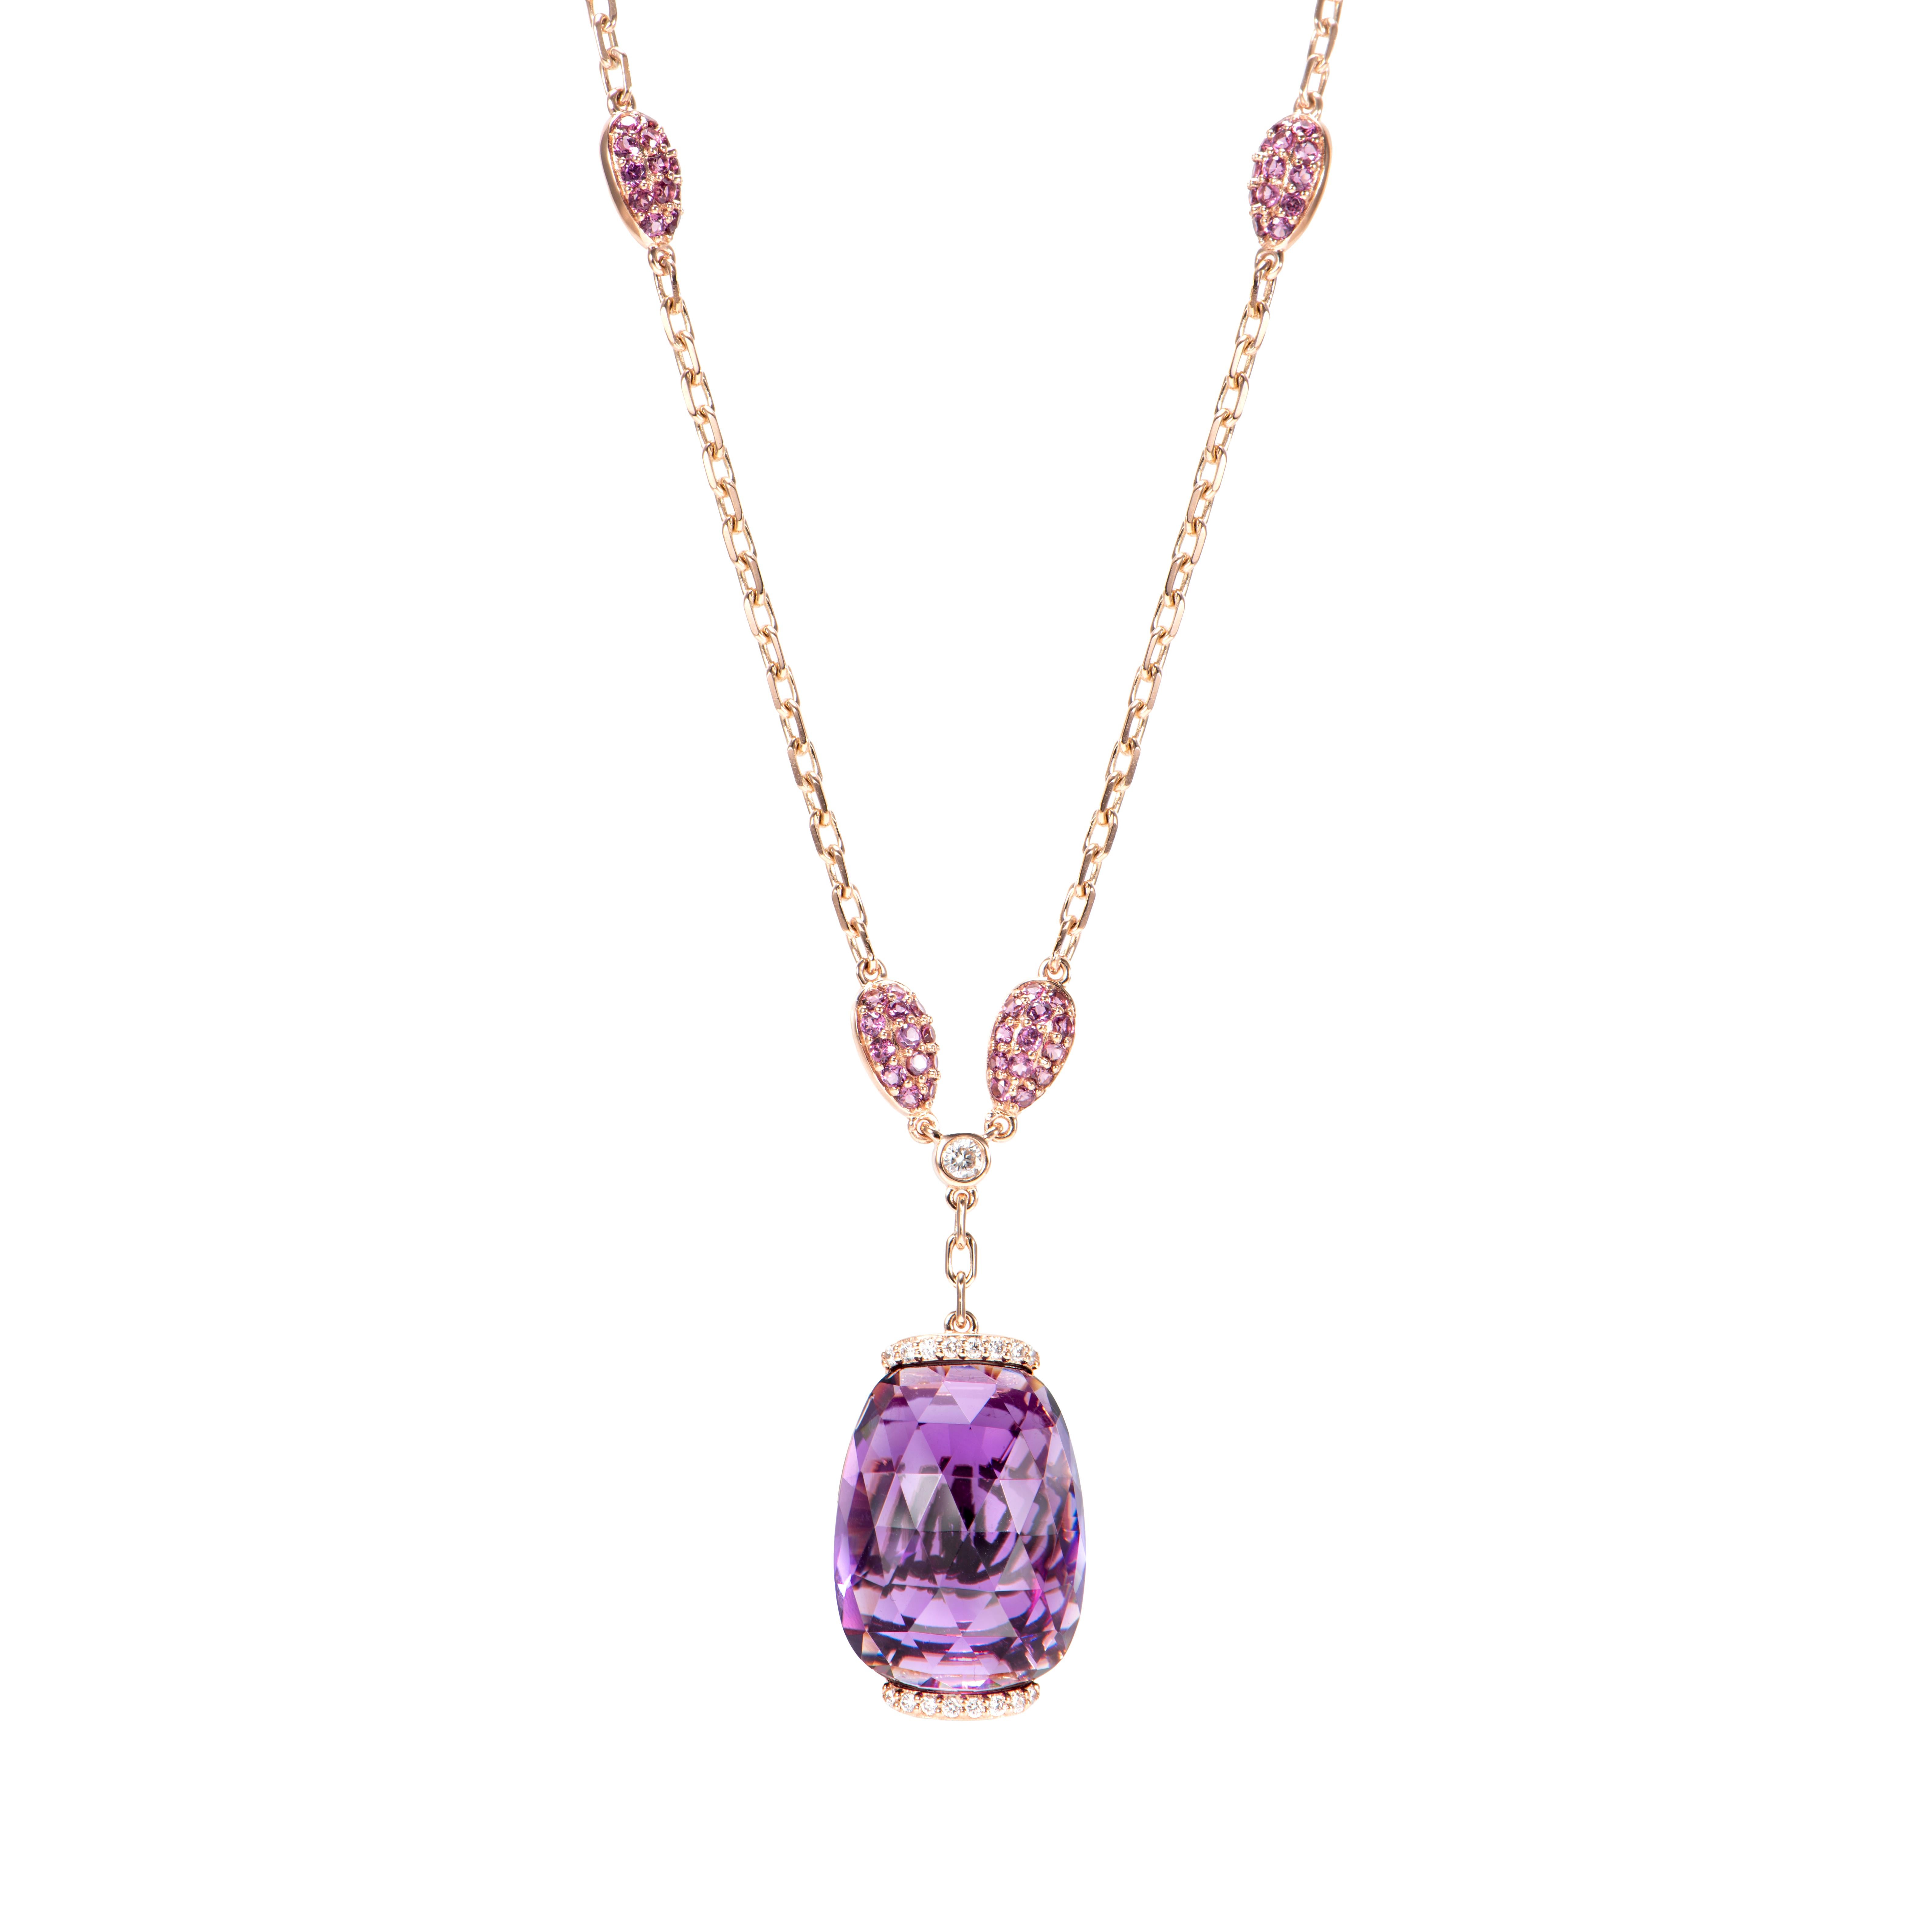 Contemporary Amethyst Pendant with Rhodolite and White Diamond in 18 Karat Rose Gold. For Sale